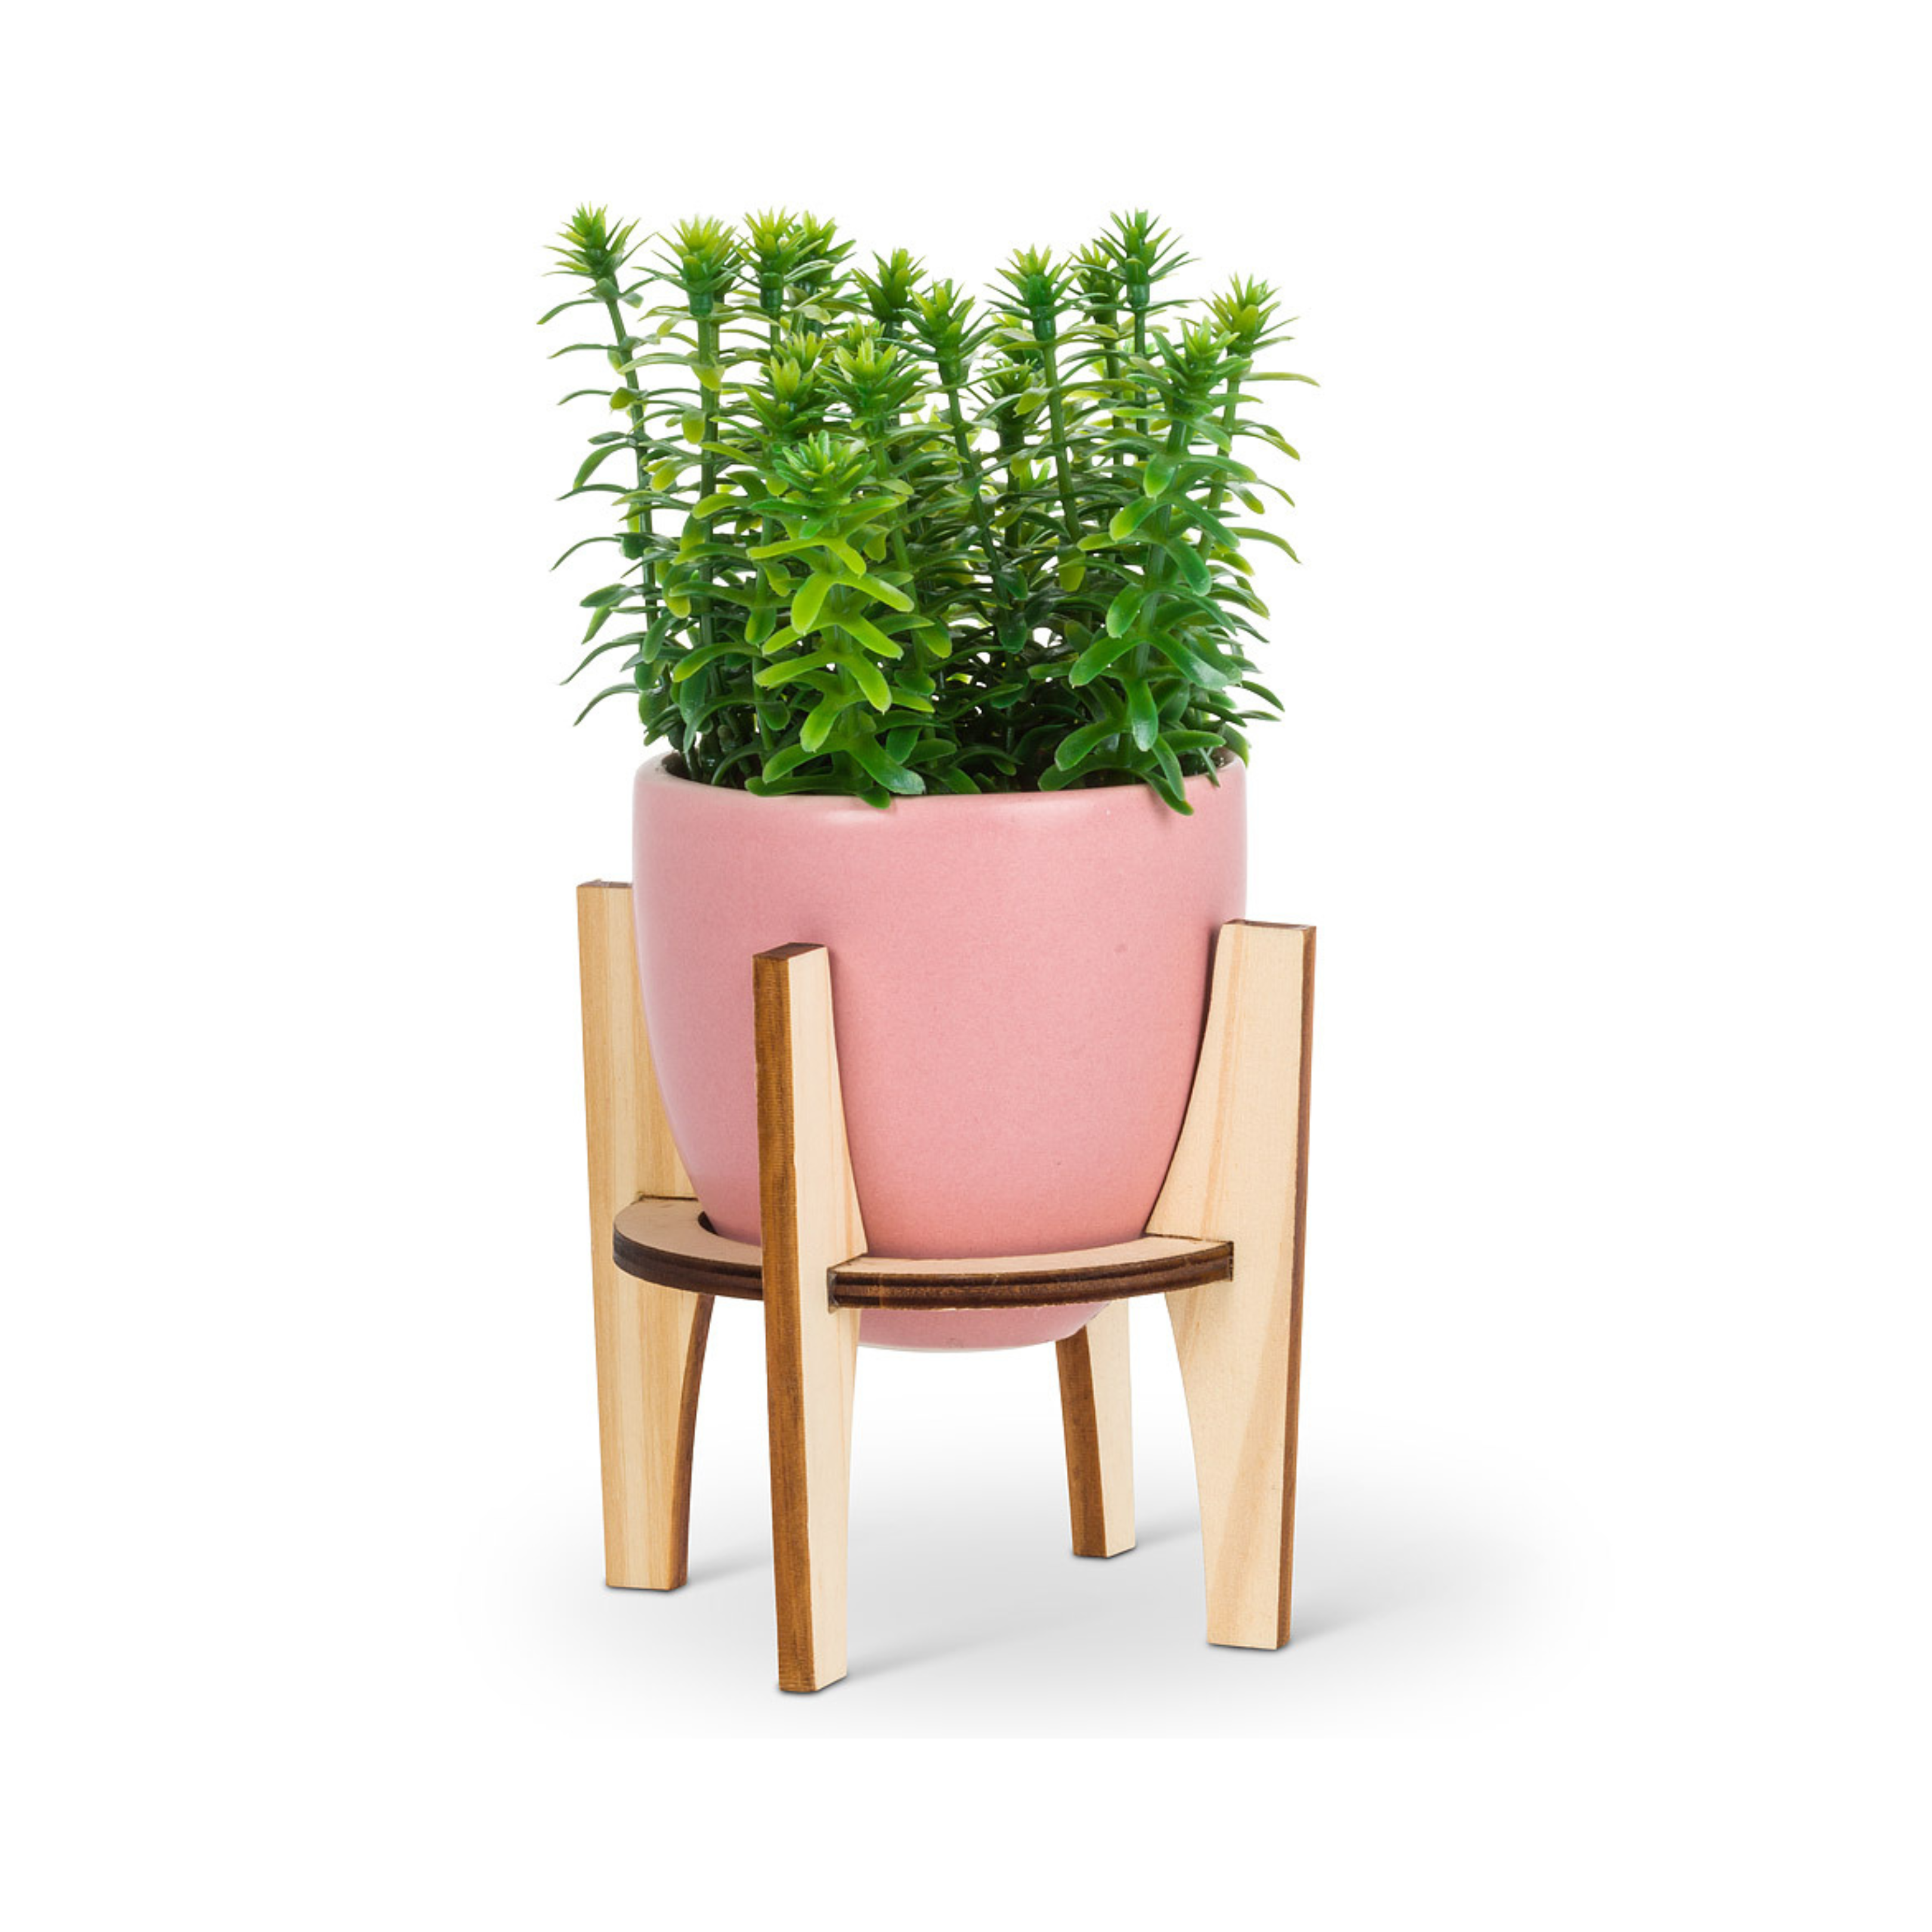 Pink Planter With Wooden Stand